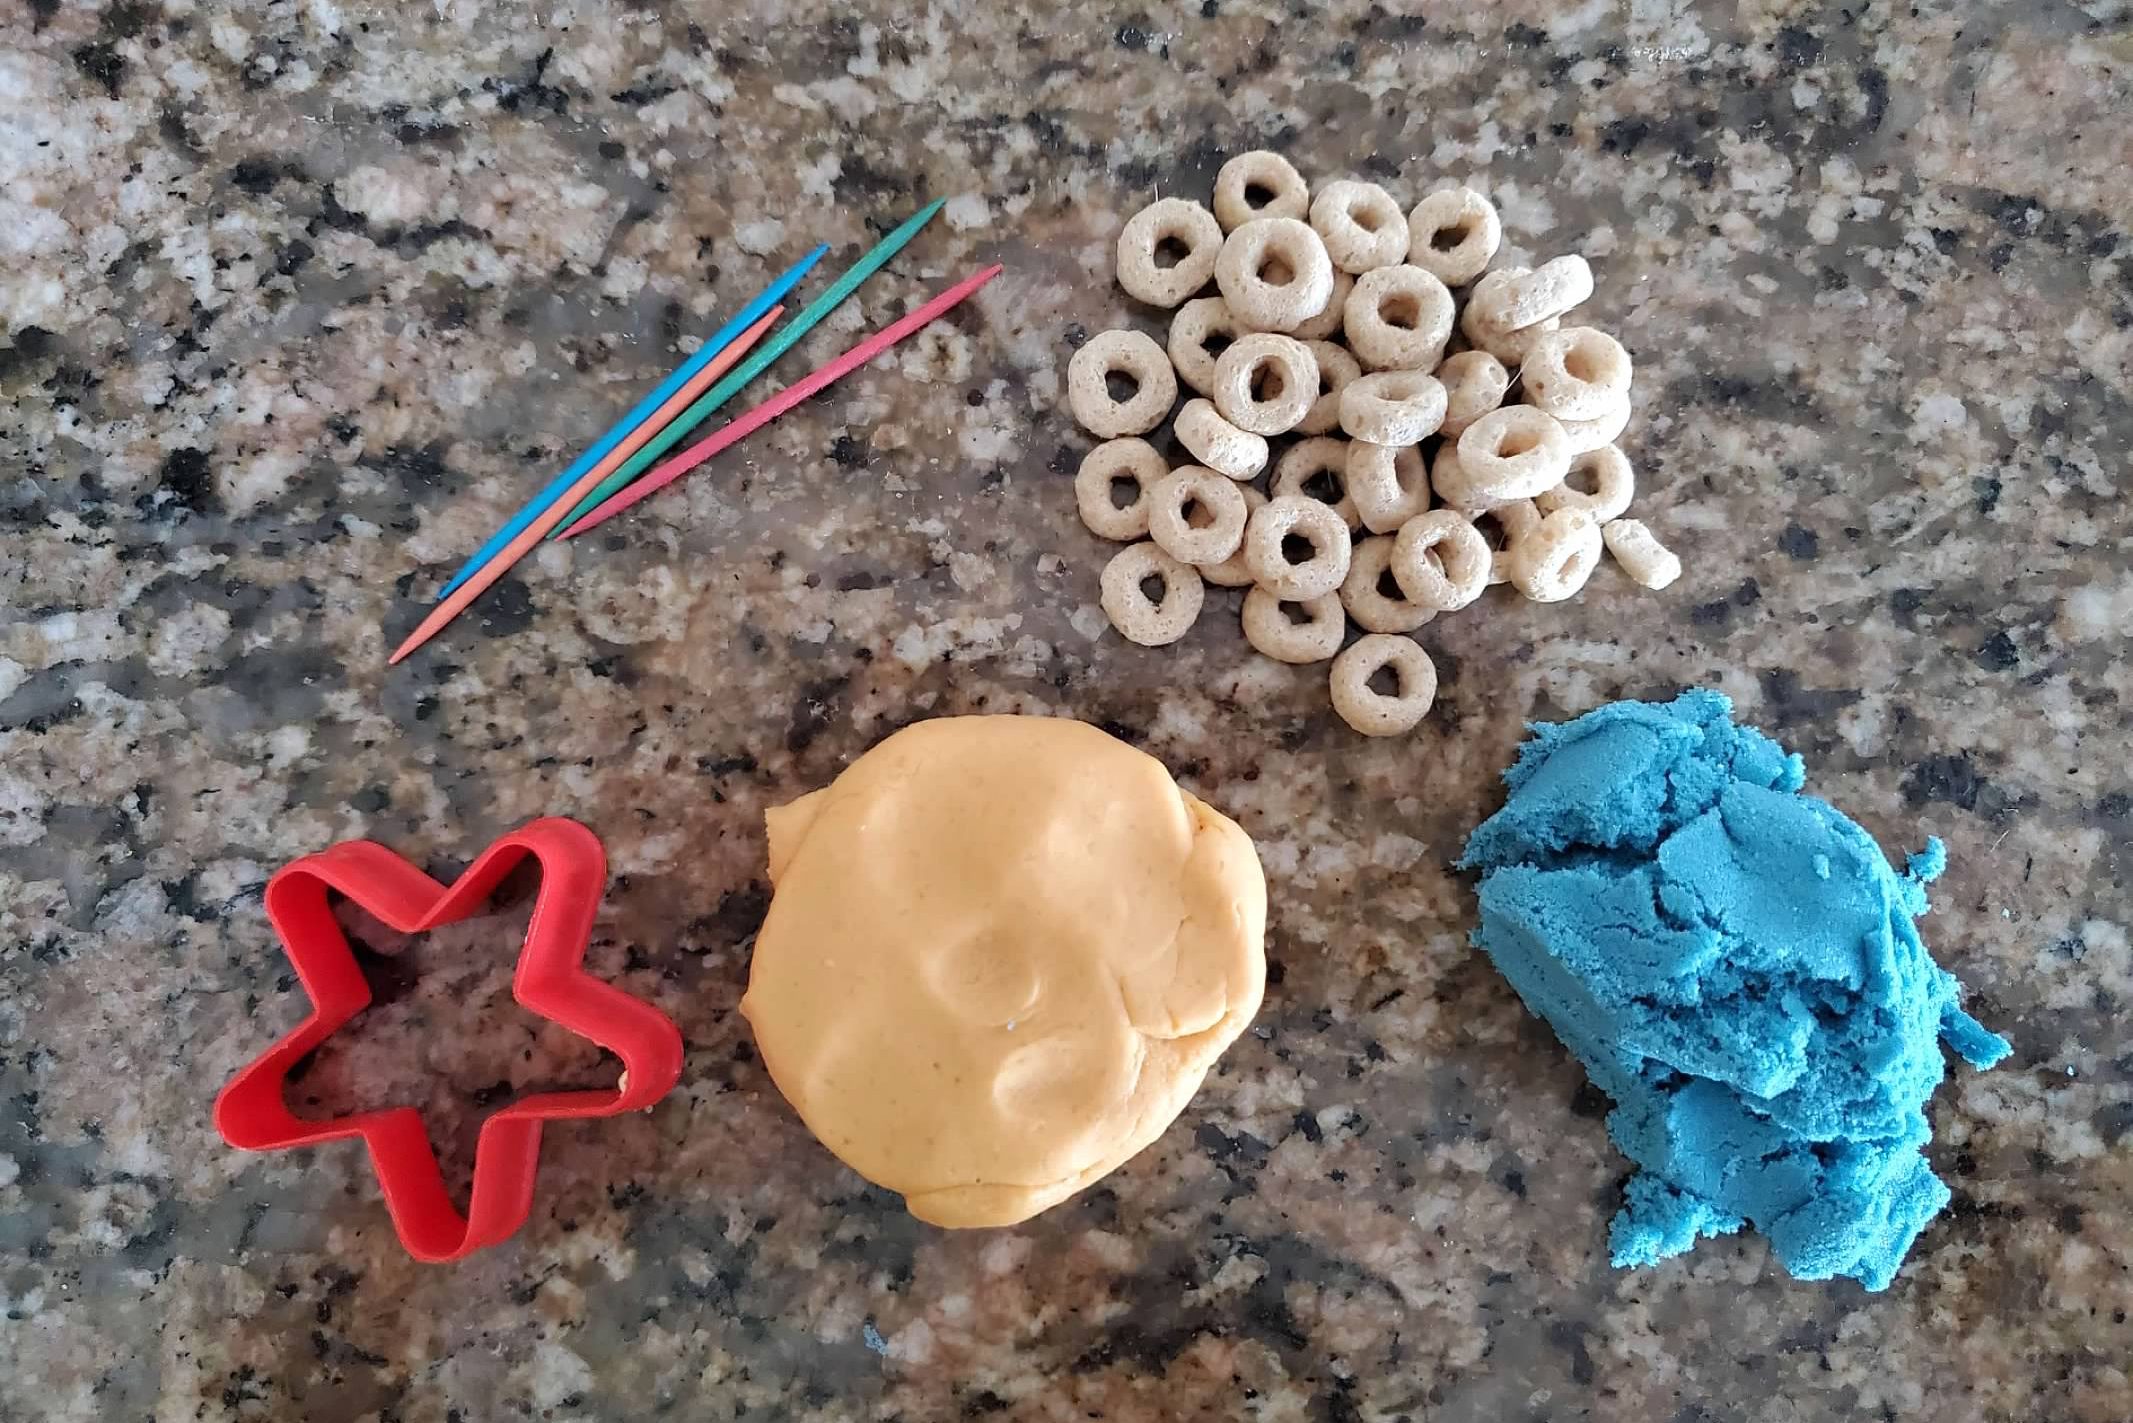 plastic cookie cutter, Cheerios, play dough and kinetic sand